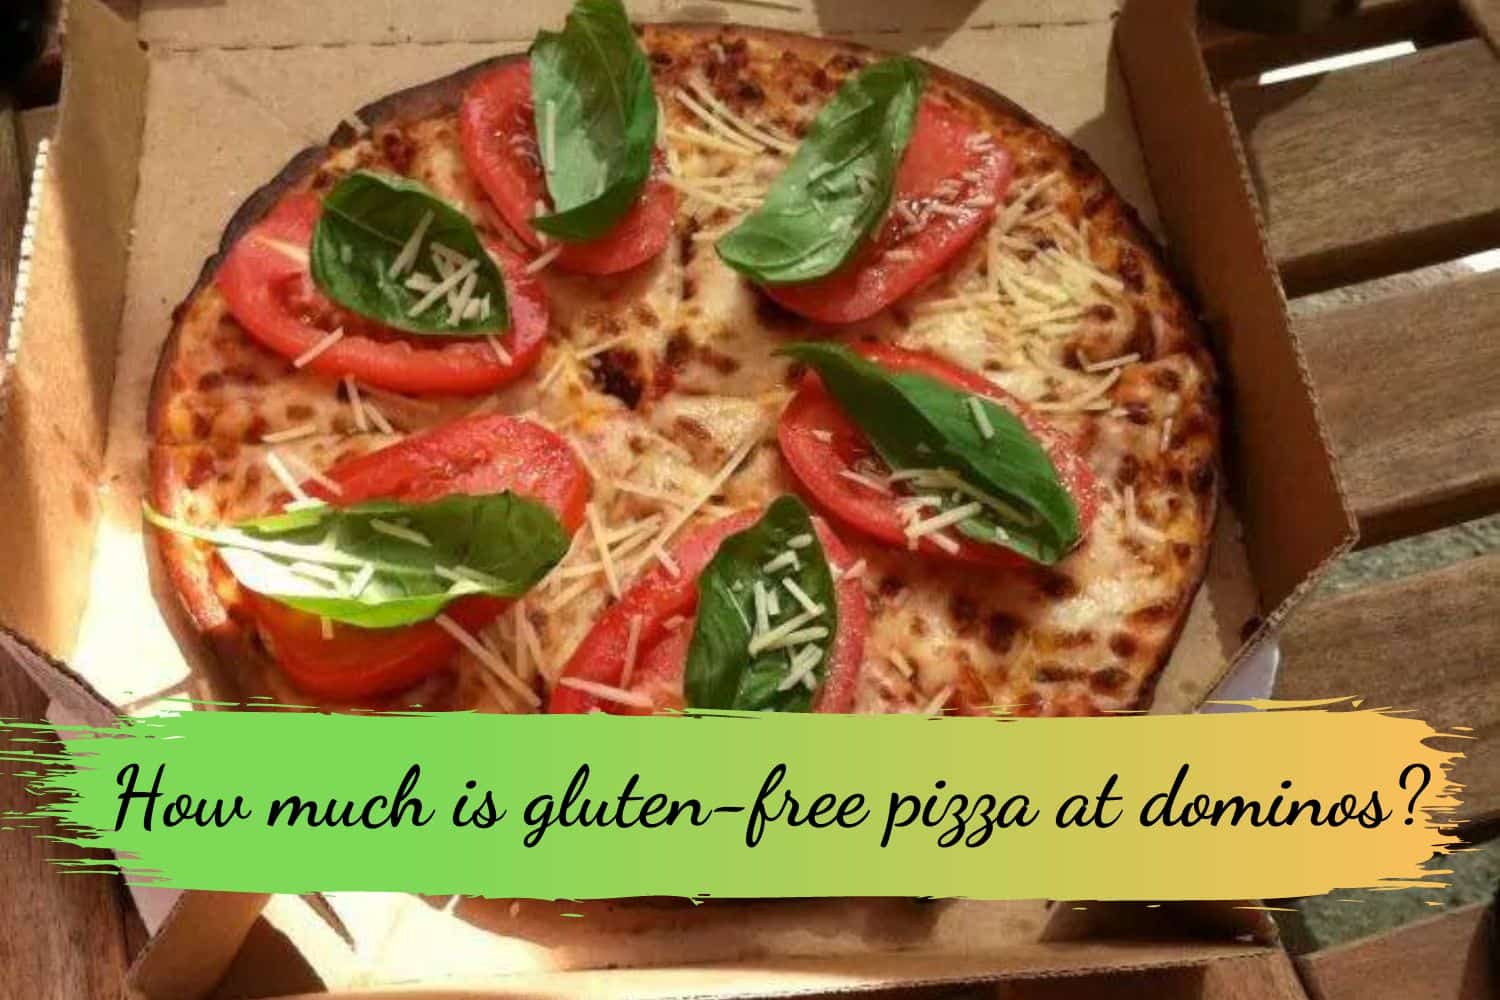 How much is gluten-free pizza at dominos?